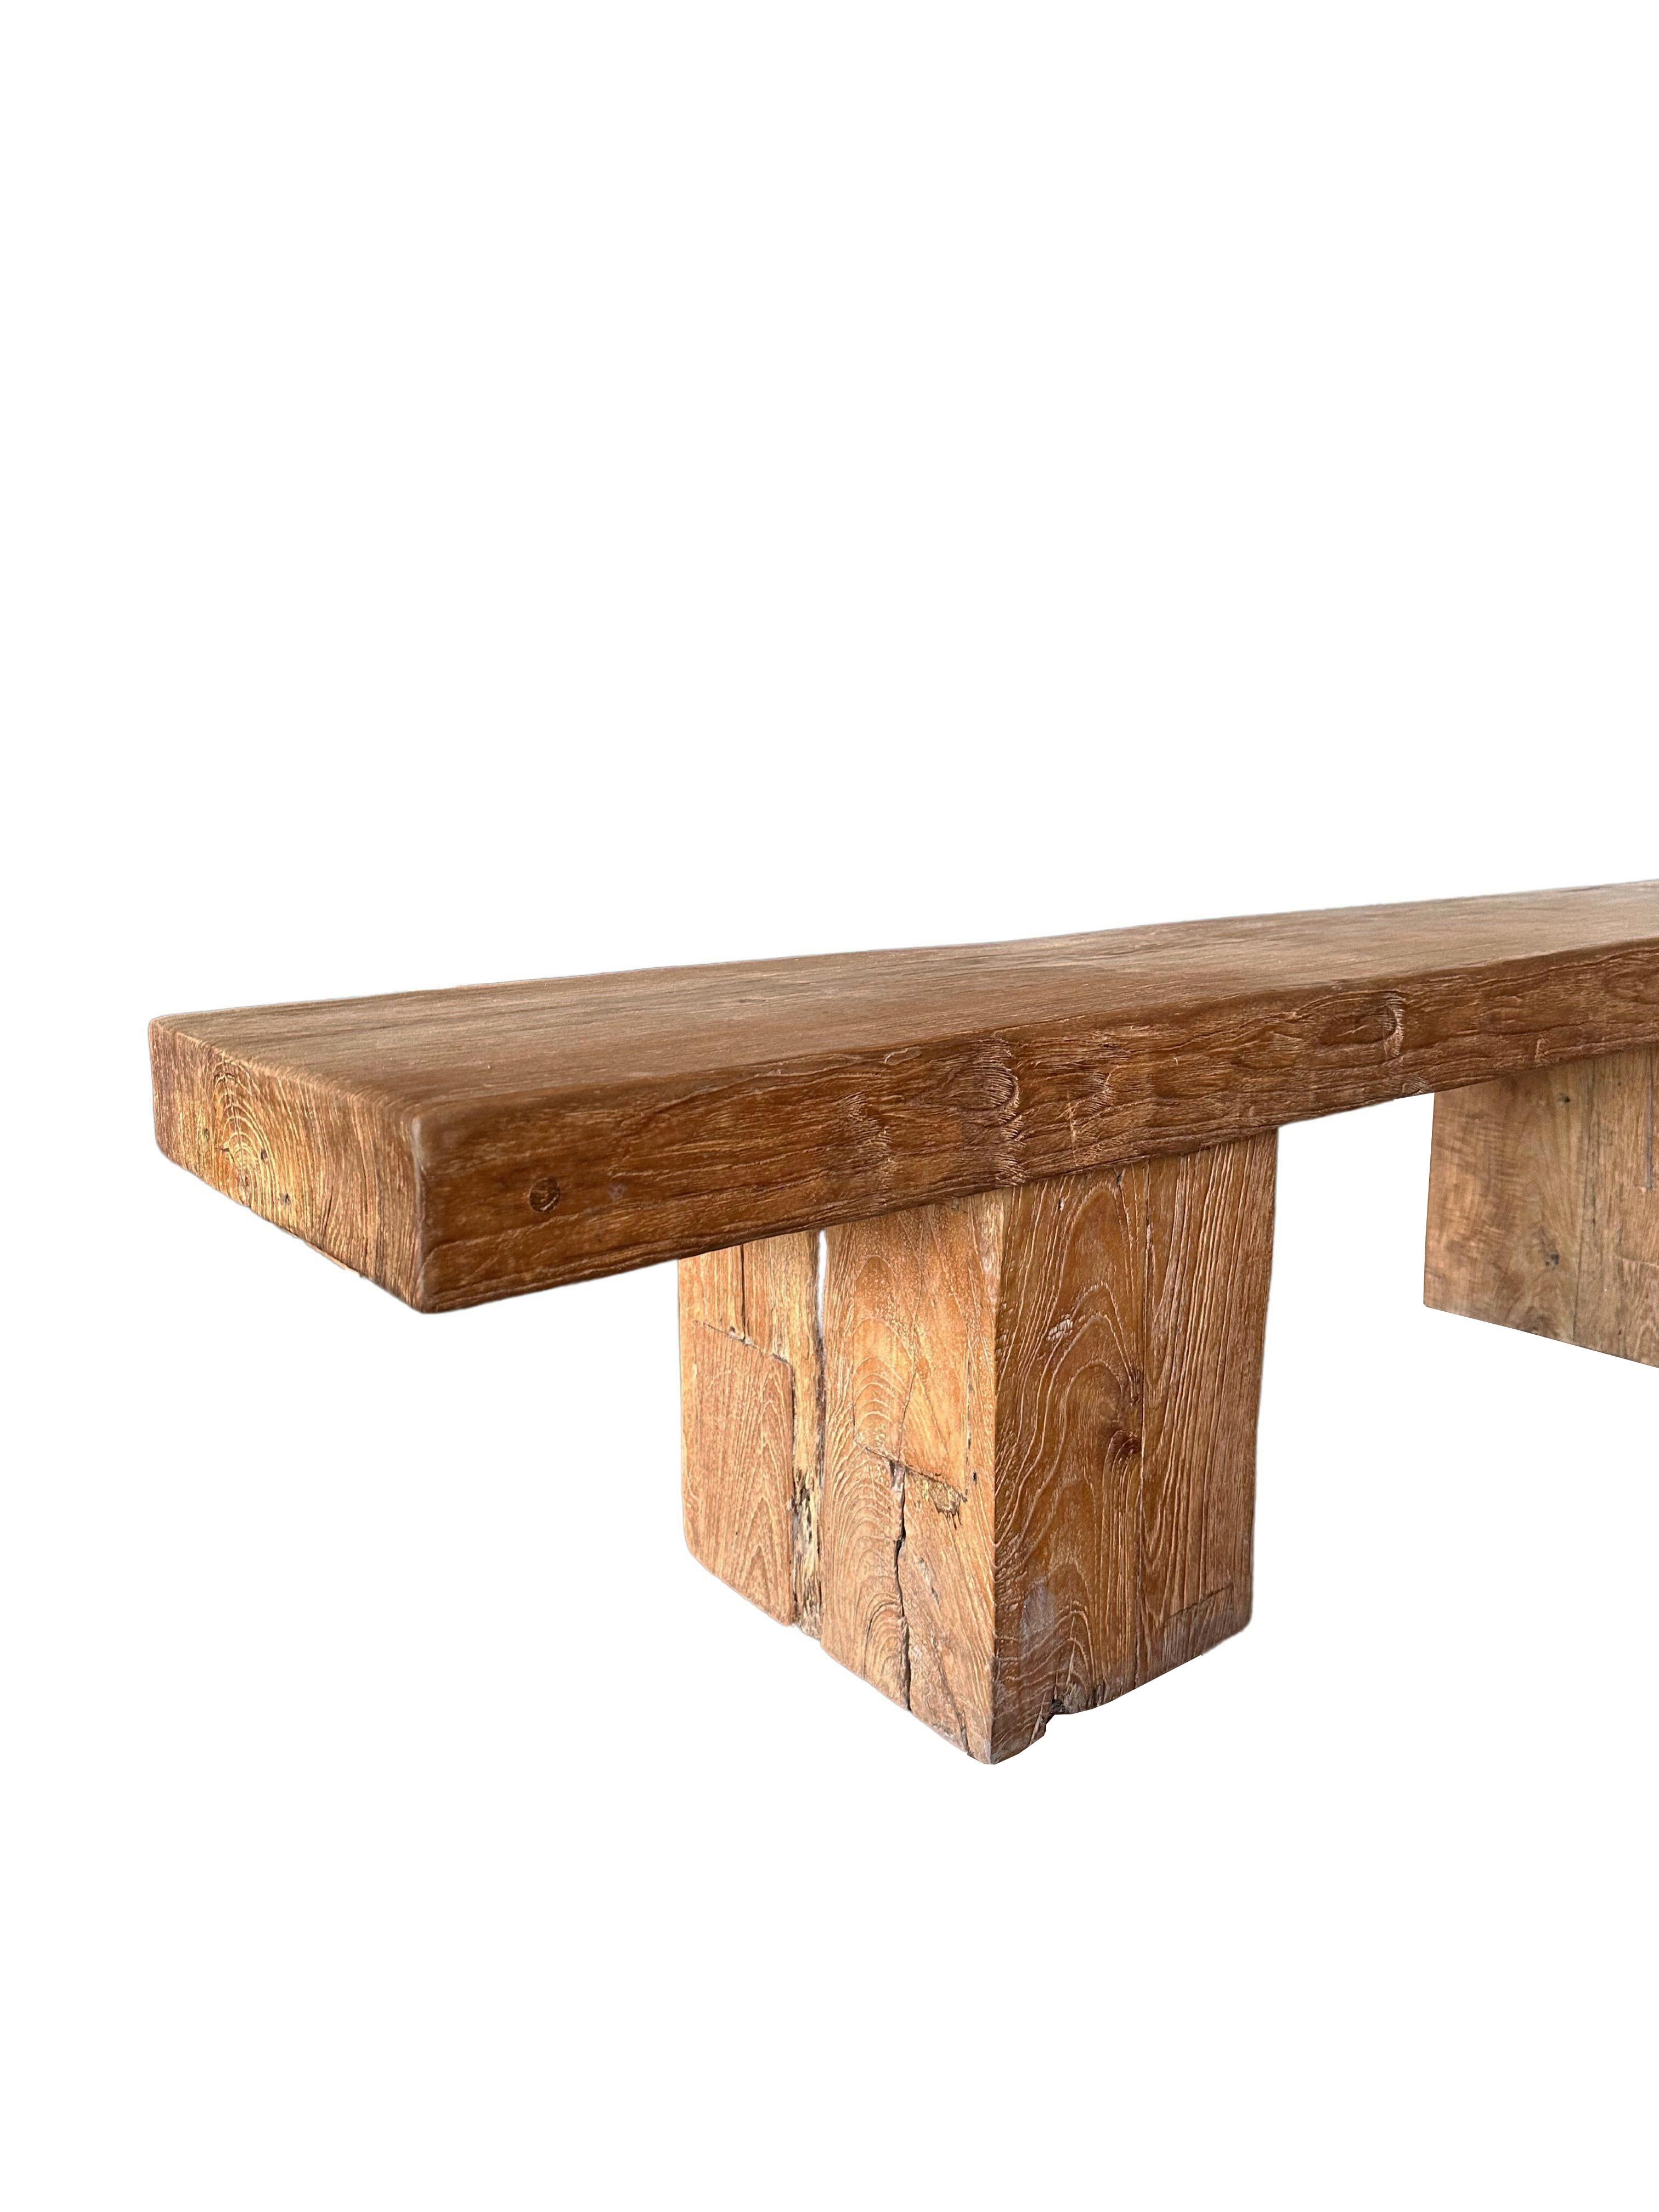 This solid teak wood bench features a wonderful organic form with a mix of wood textures and shades. Elevated by two solid teak wood legs, the seat and legs were carved from single blocks of wood. A wonderful addition to bring warmth to any space.